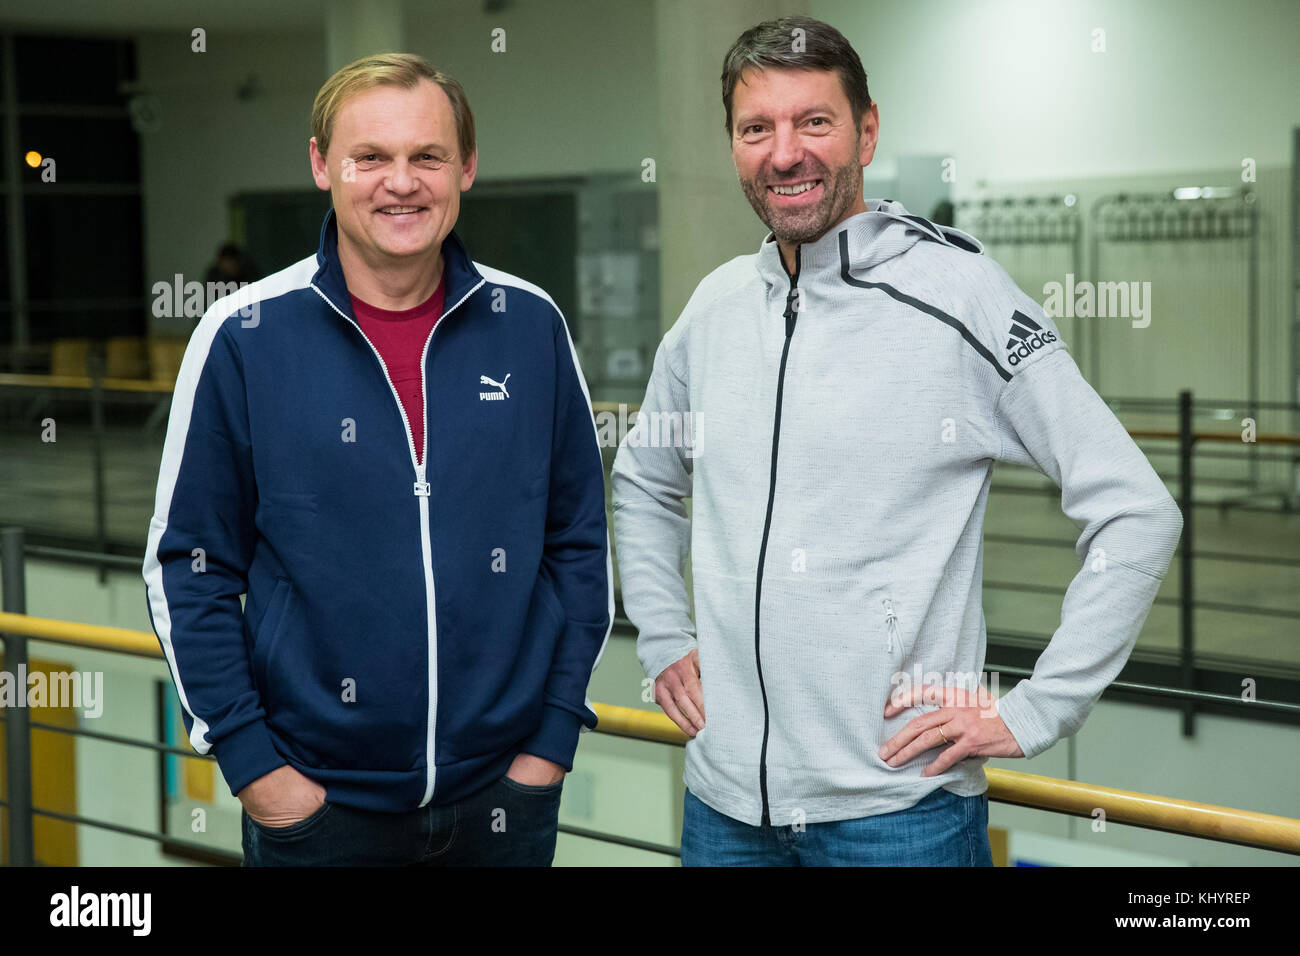 Nuremberg, Germany. 21st Nov, 2017. The CEOs of adidas, Kasper Rorsted (R),  and Puma, Bjoern Gulden, stand next to each other prior to a joint panel  discussion of the 'Nuremberg News' in